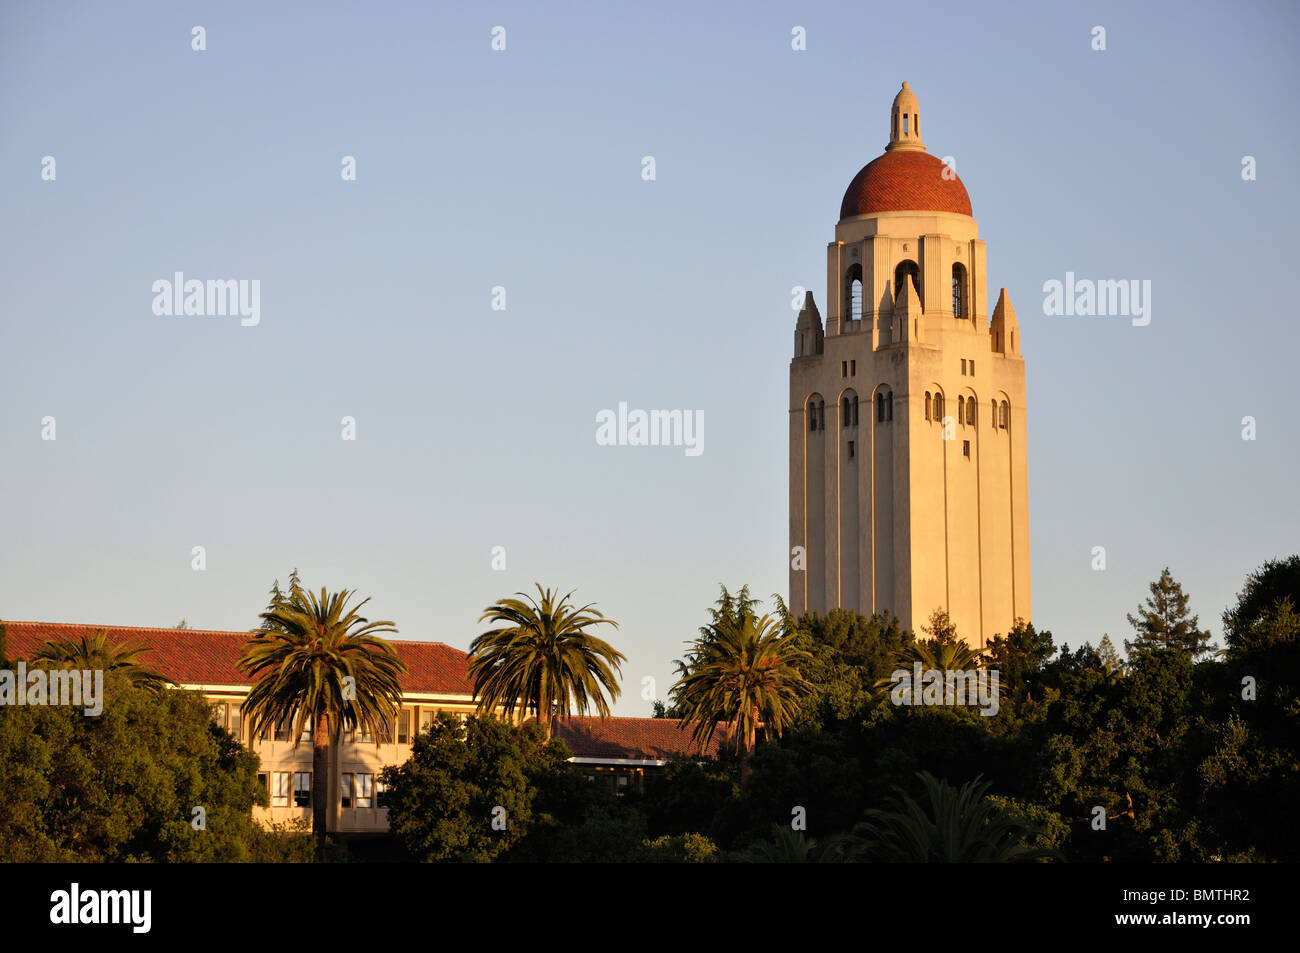 Hoover Tower at sunset, Stanford University, Palo Alto, California, USA Stock Photo